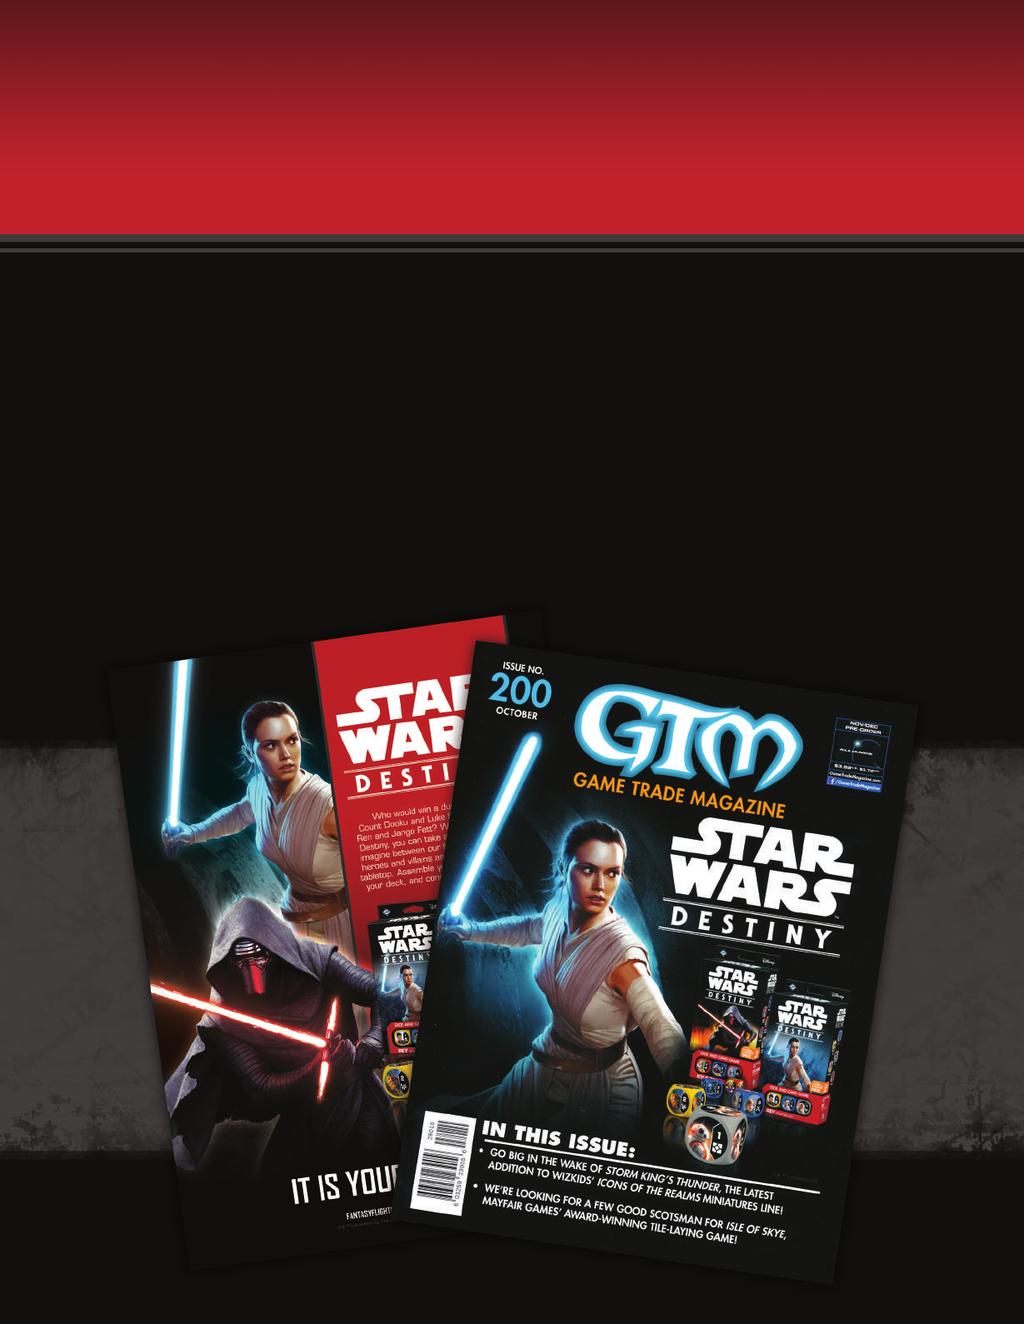 ADVERTISING Our marketing strategy begins with a robust advertising plan for Star Wars: Destiny. In October, Star Wars: Destiny formed the cover story of Game Trade Magazine s landmark 200th issue.